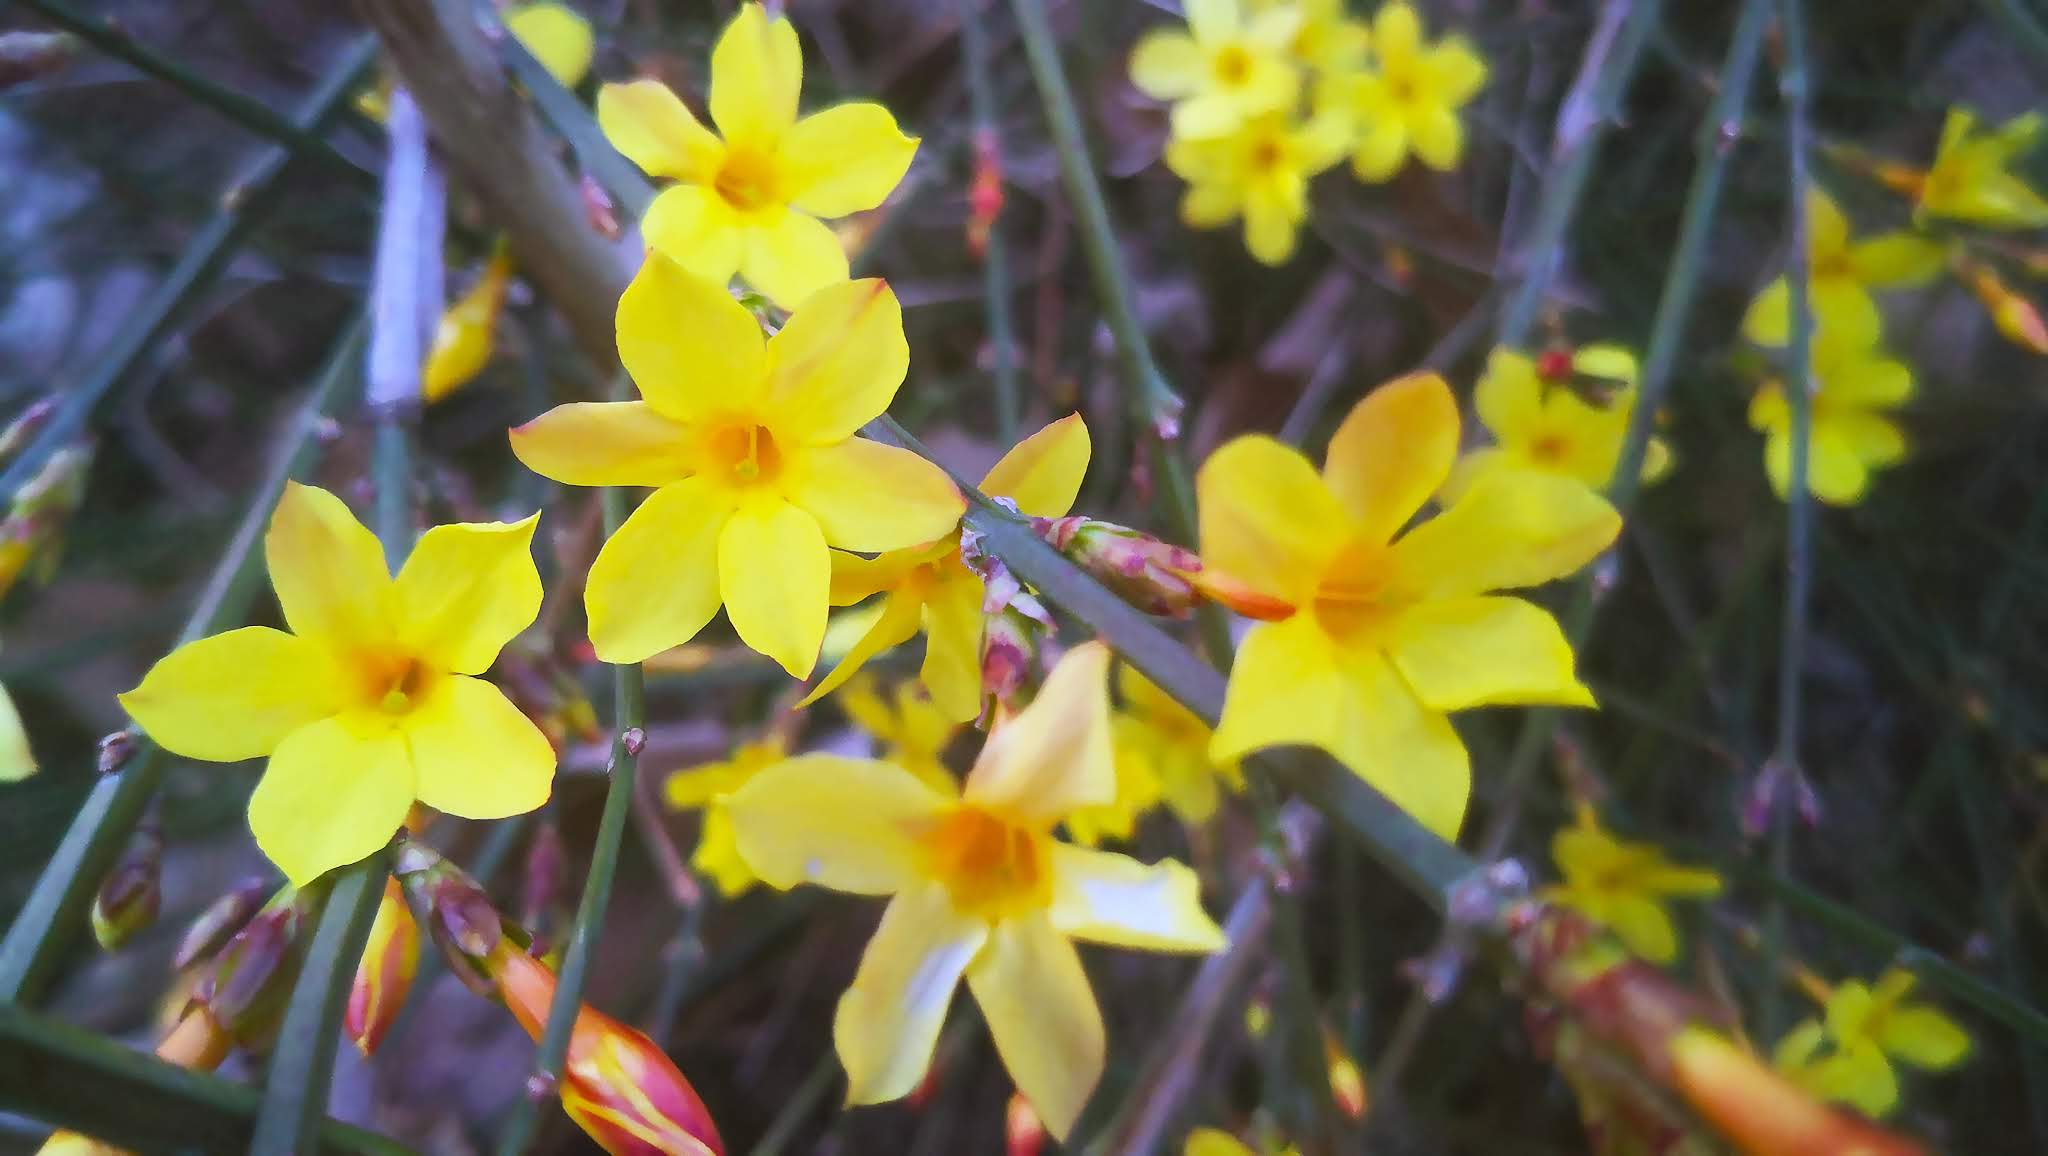 13 Messengers of Spring-Winter Jasmine Photography, come to see our collection